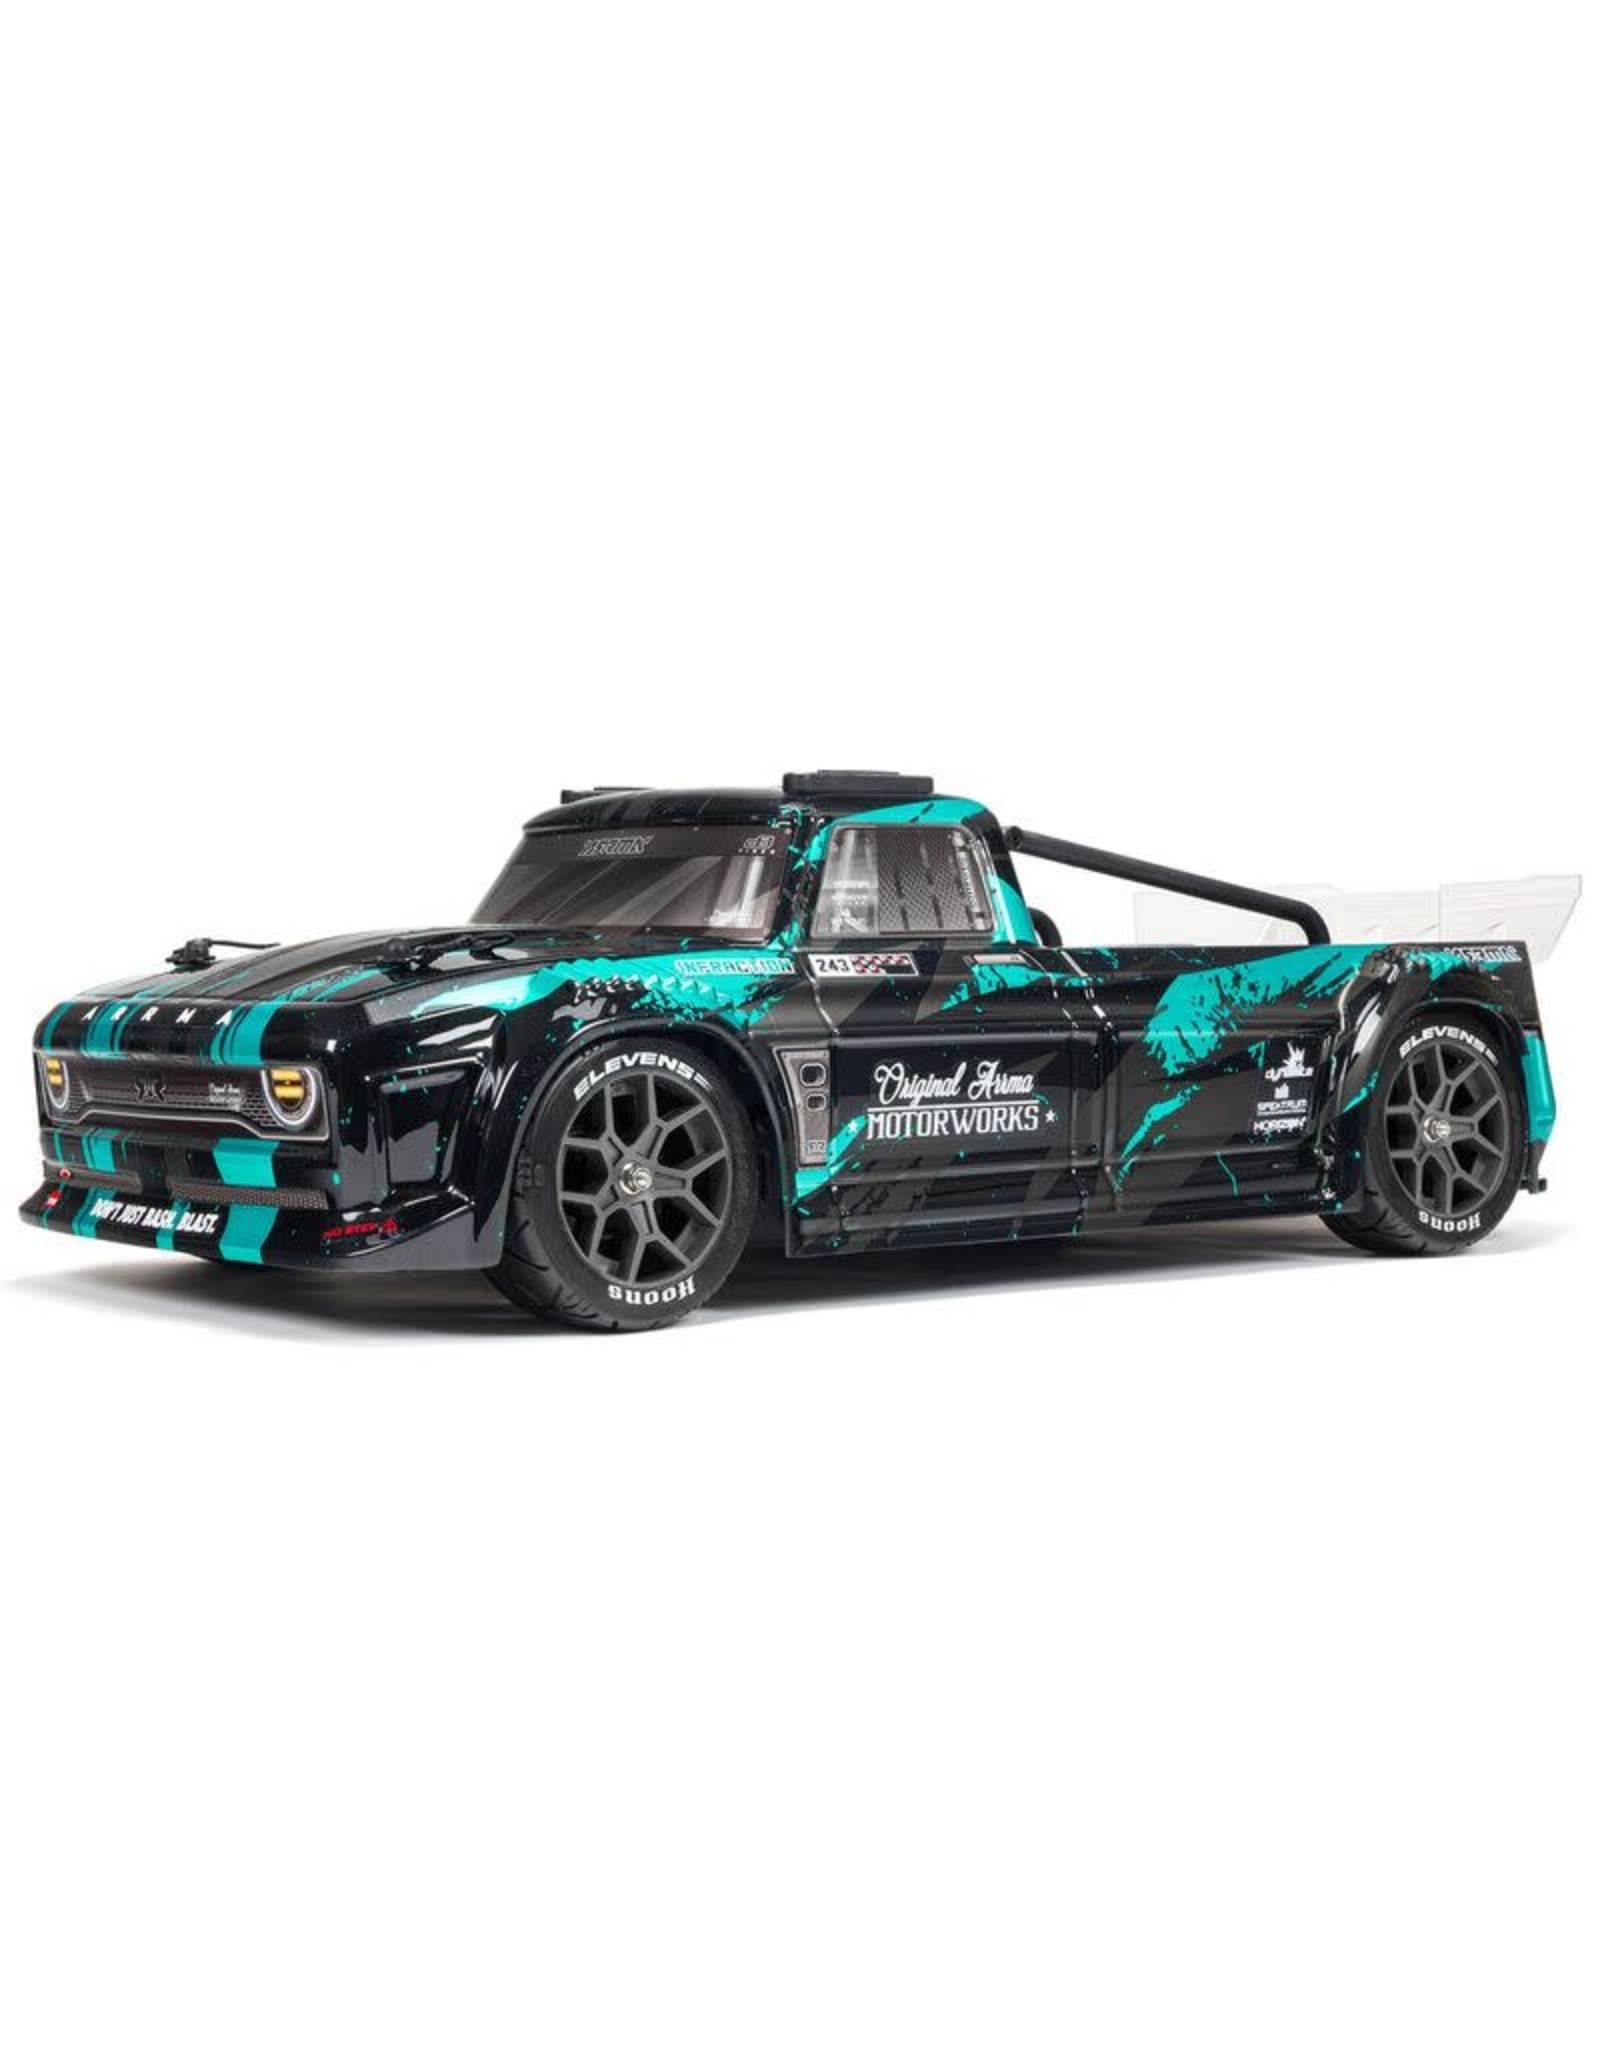 ARRMA 1/8 INFRACTION 4X4 3S BLX 4WD All-Road Street Bash Resto-Mod Truck RTR, Teal